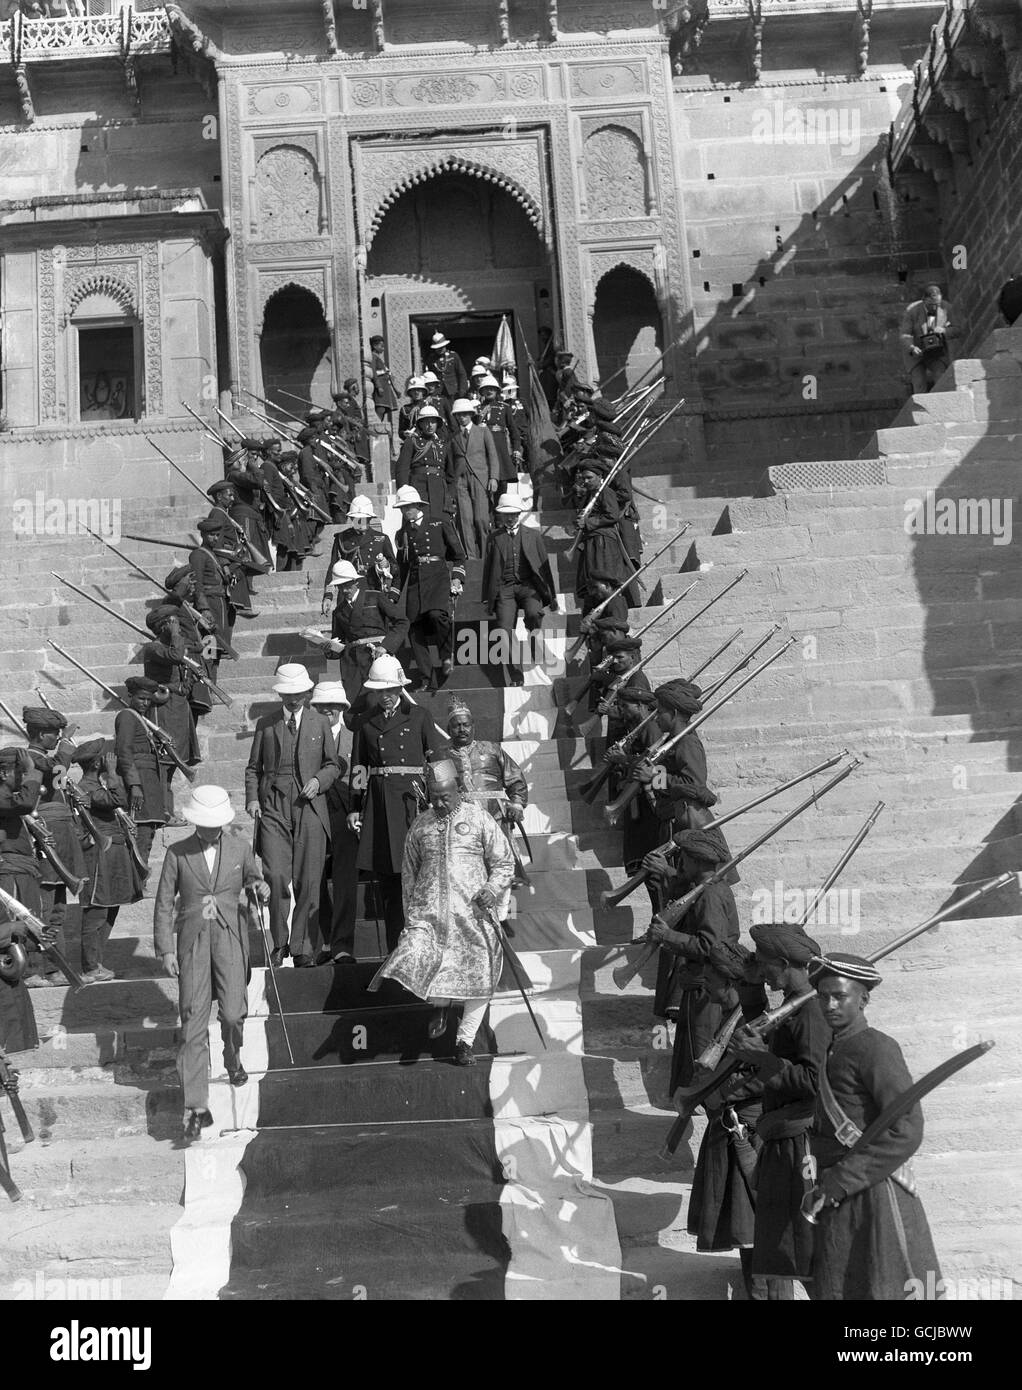 THE PRINCE OF WALES' TOUR OF JAPAN AND THE EAST: BENARES. THE PRINCE, ACCOMPANIED BY THE MAHARAJAH OF BENARES AND THEIR SUITES, LEAVING THE RAMNAGAR PALACE TO CROSS THE GANGES. THE GUARD OF HONOUR ARE EQUIPPED WITH ANTIQUATED MUSKETS. 13TH DECEMBER 1921. Stock Photo